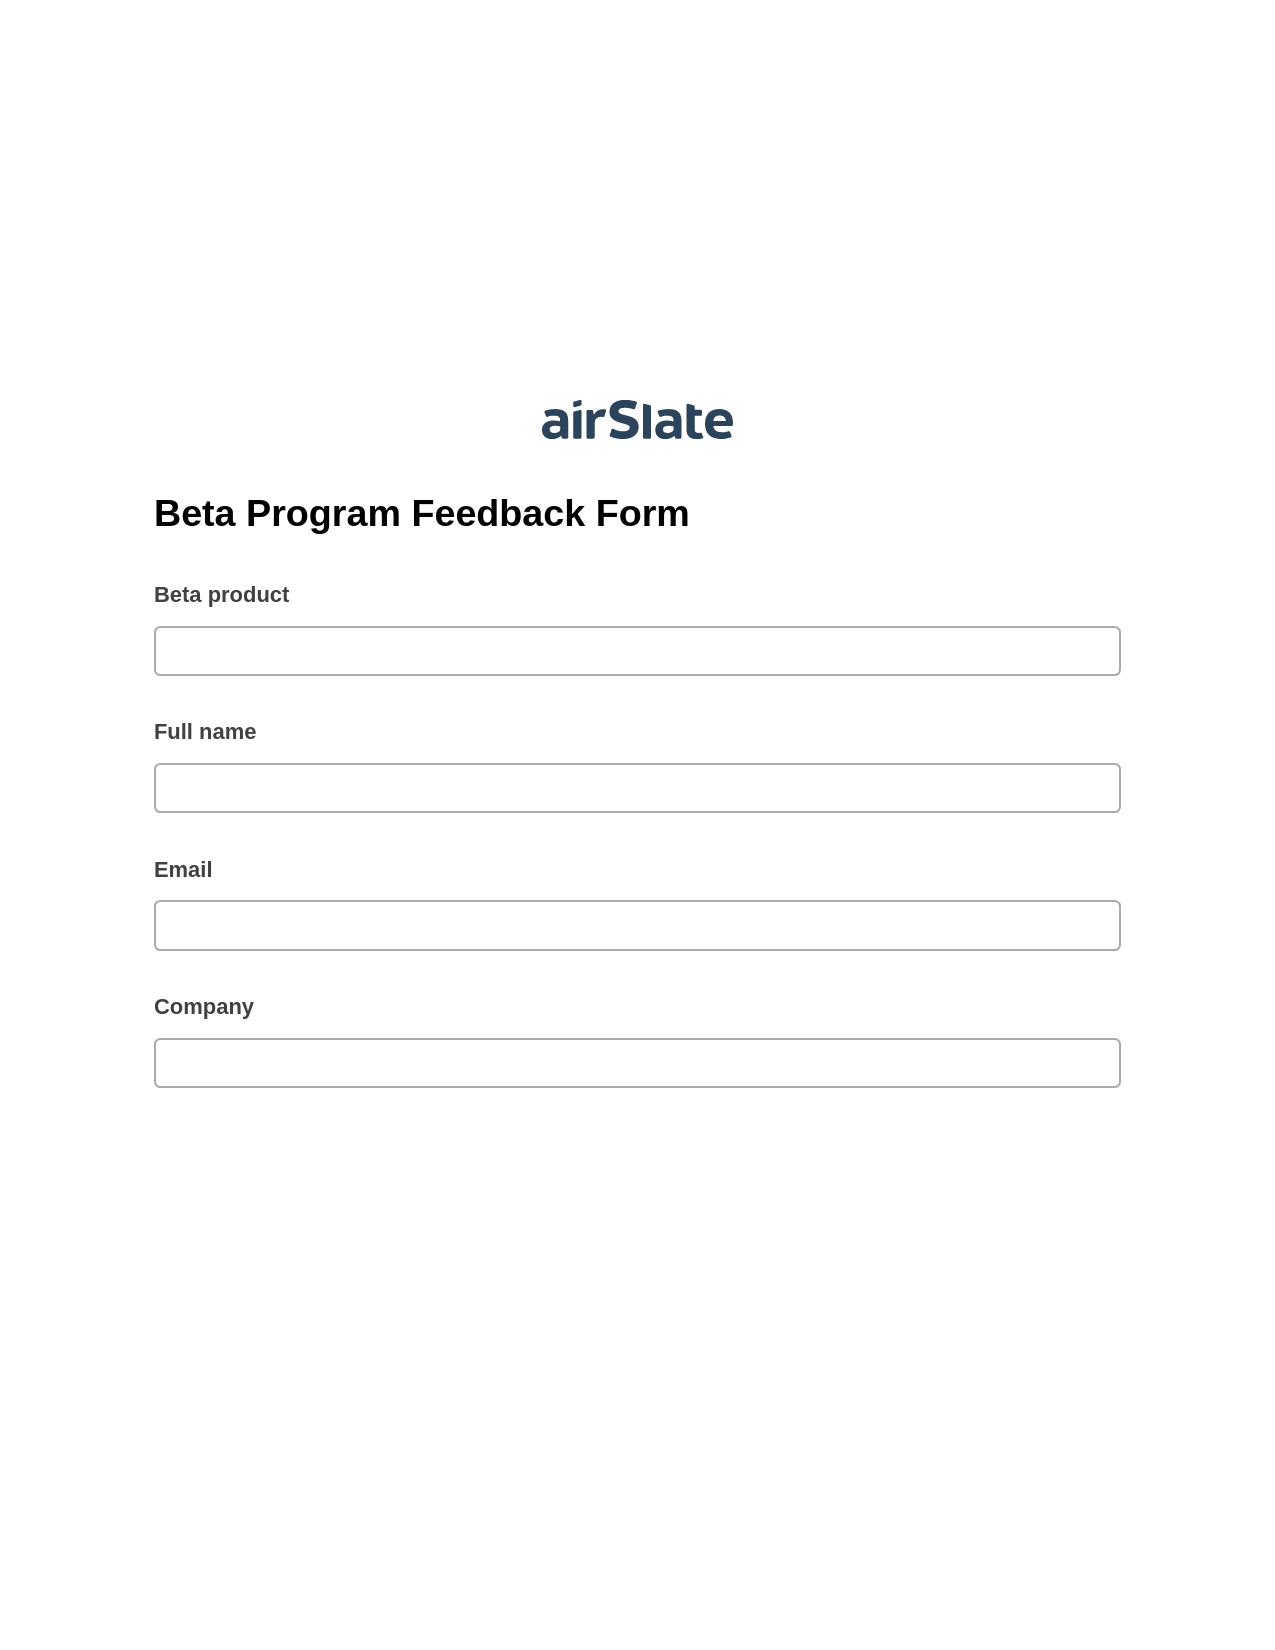 Multirole Beta Program Feedback Form Pre-fill from Google Sheets Bot, Send a Slate with Roles Bot, Email Notification Postfinish Bot